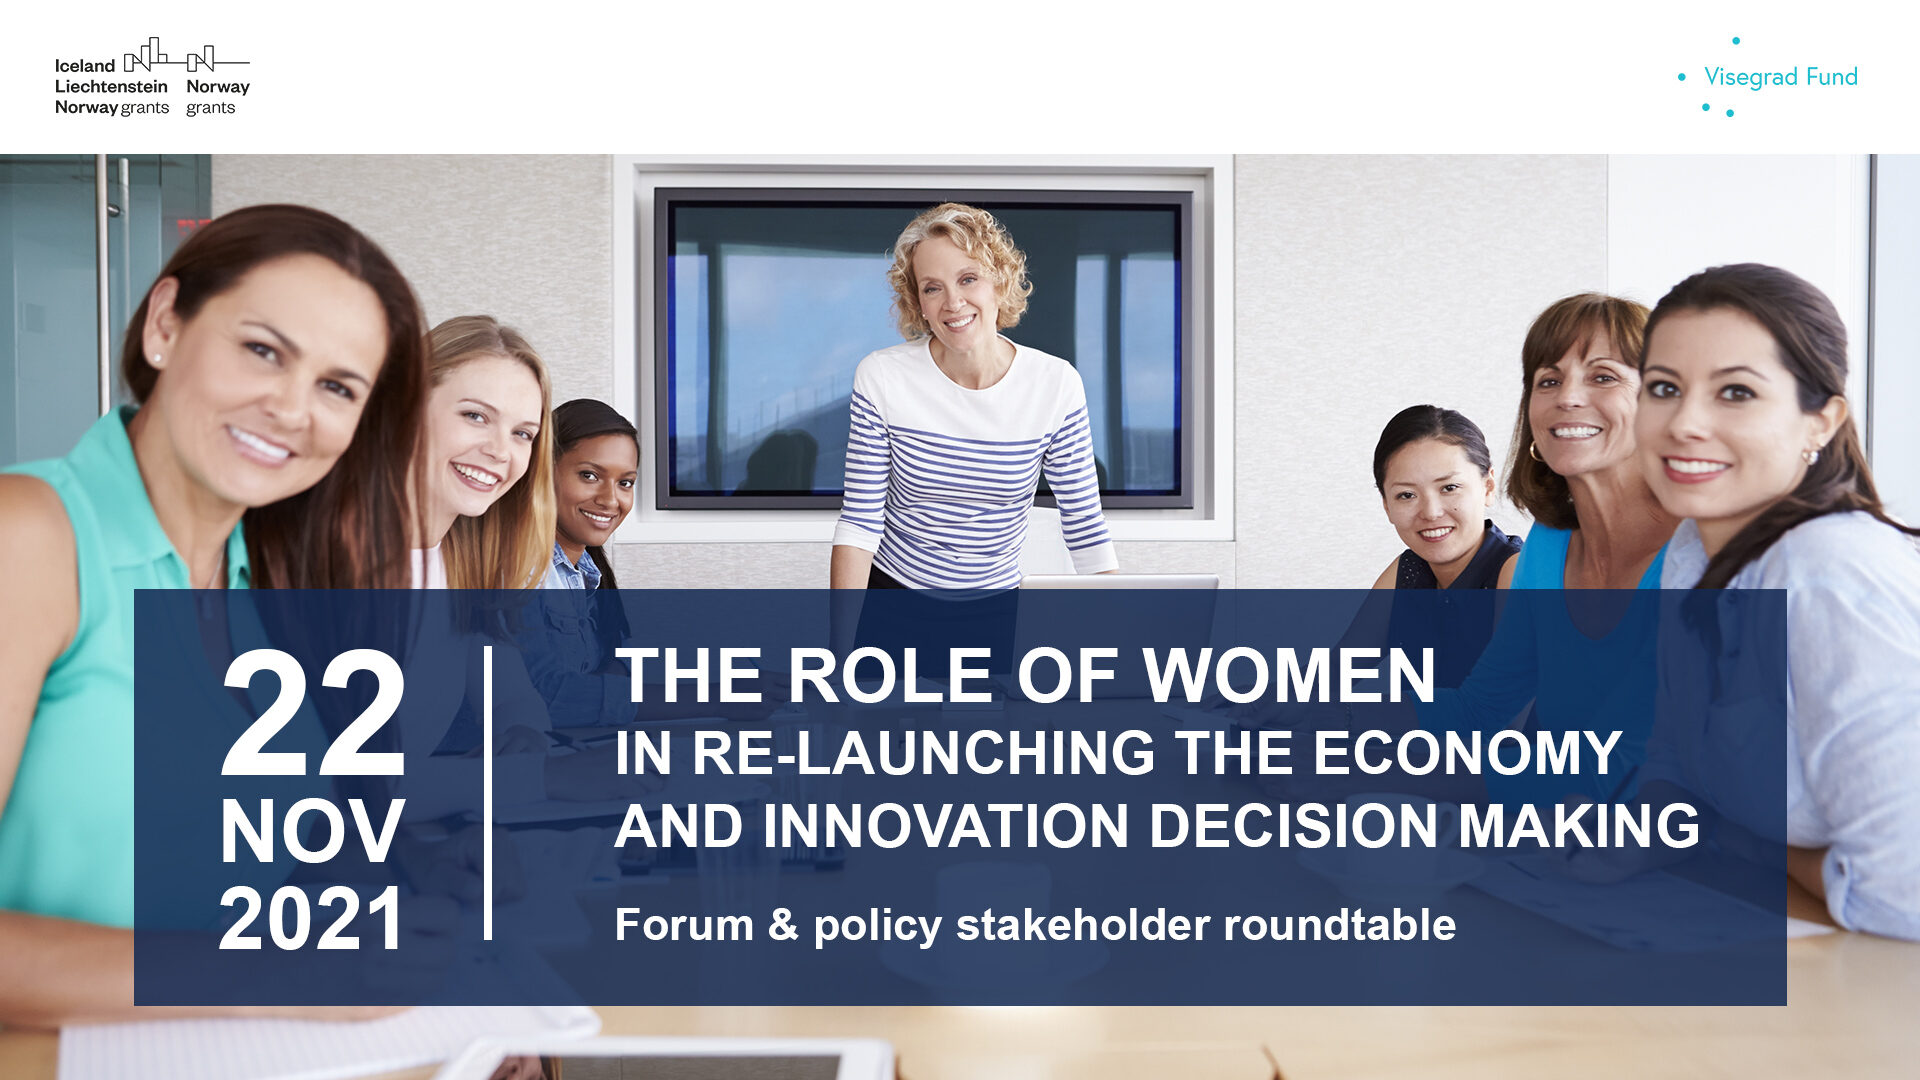 The role of women – Forum & roundtable on 22nd November